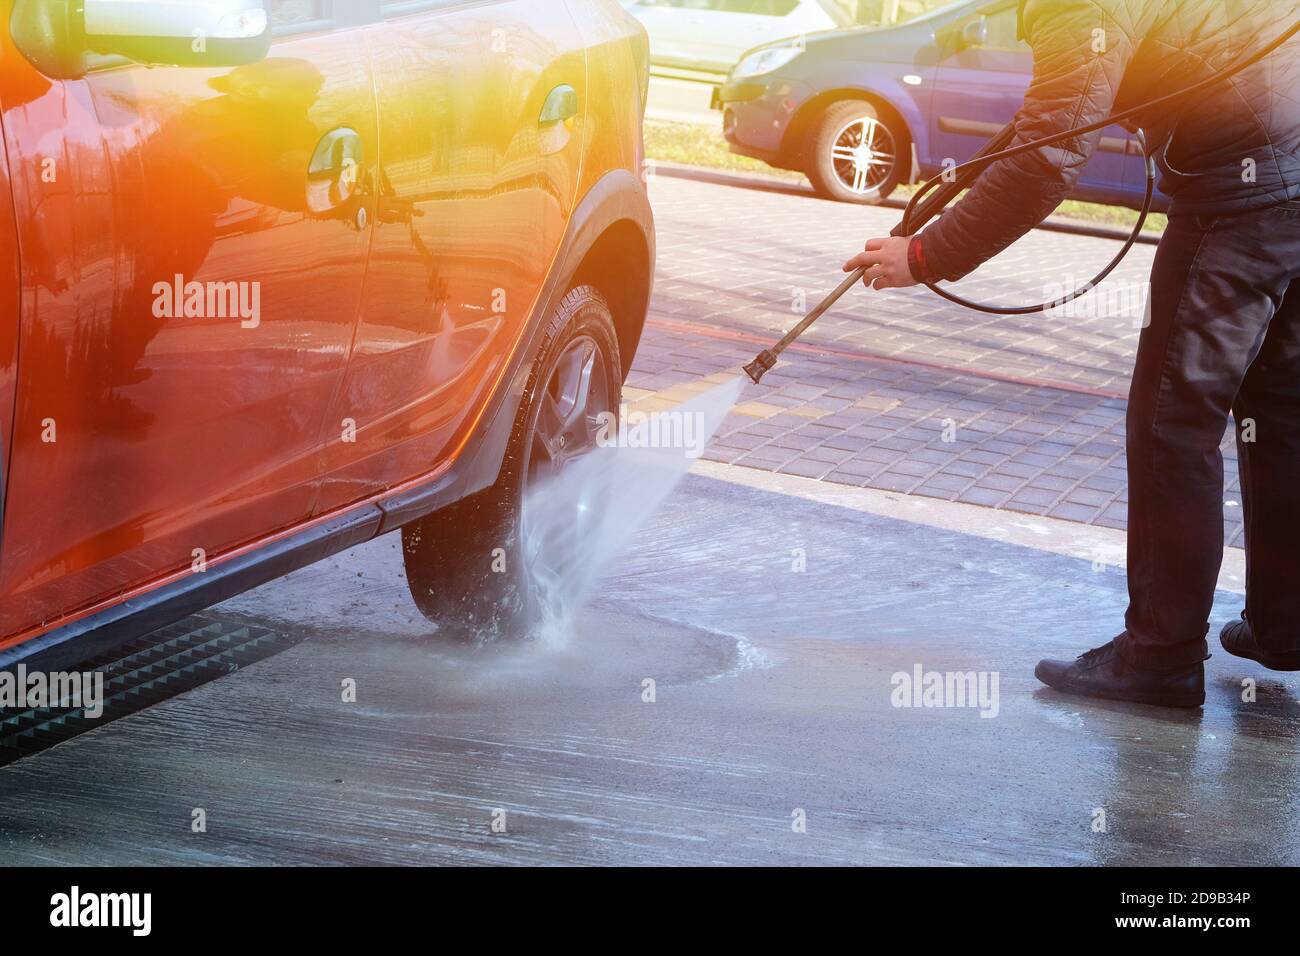 Man washes his orange car at car wash in outdoors. Cleaning with water at self-service car wash. Sunlight. Stock Photo